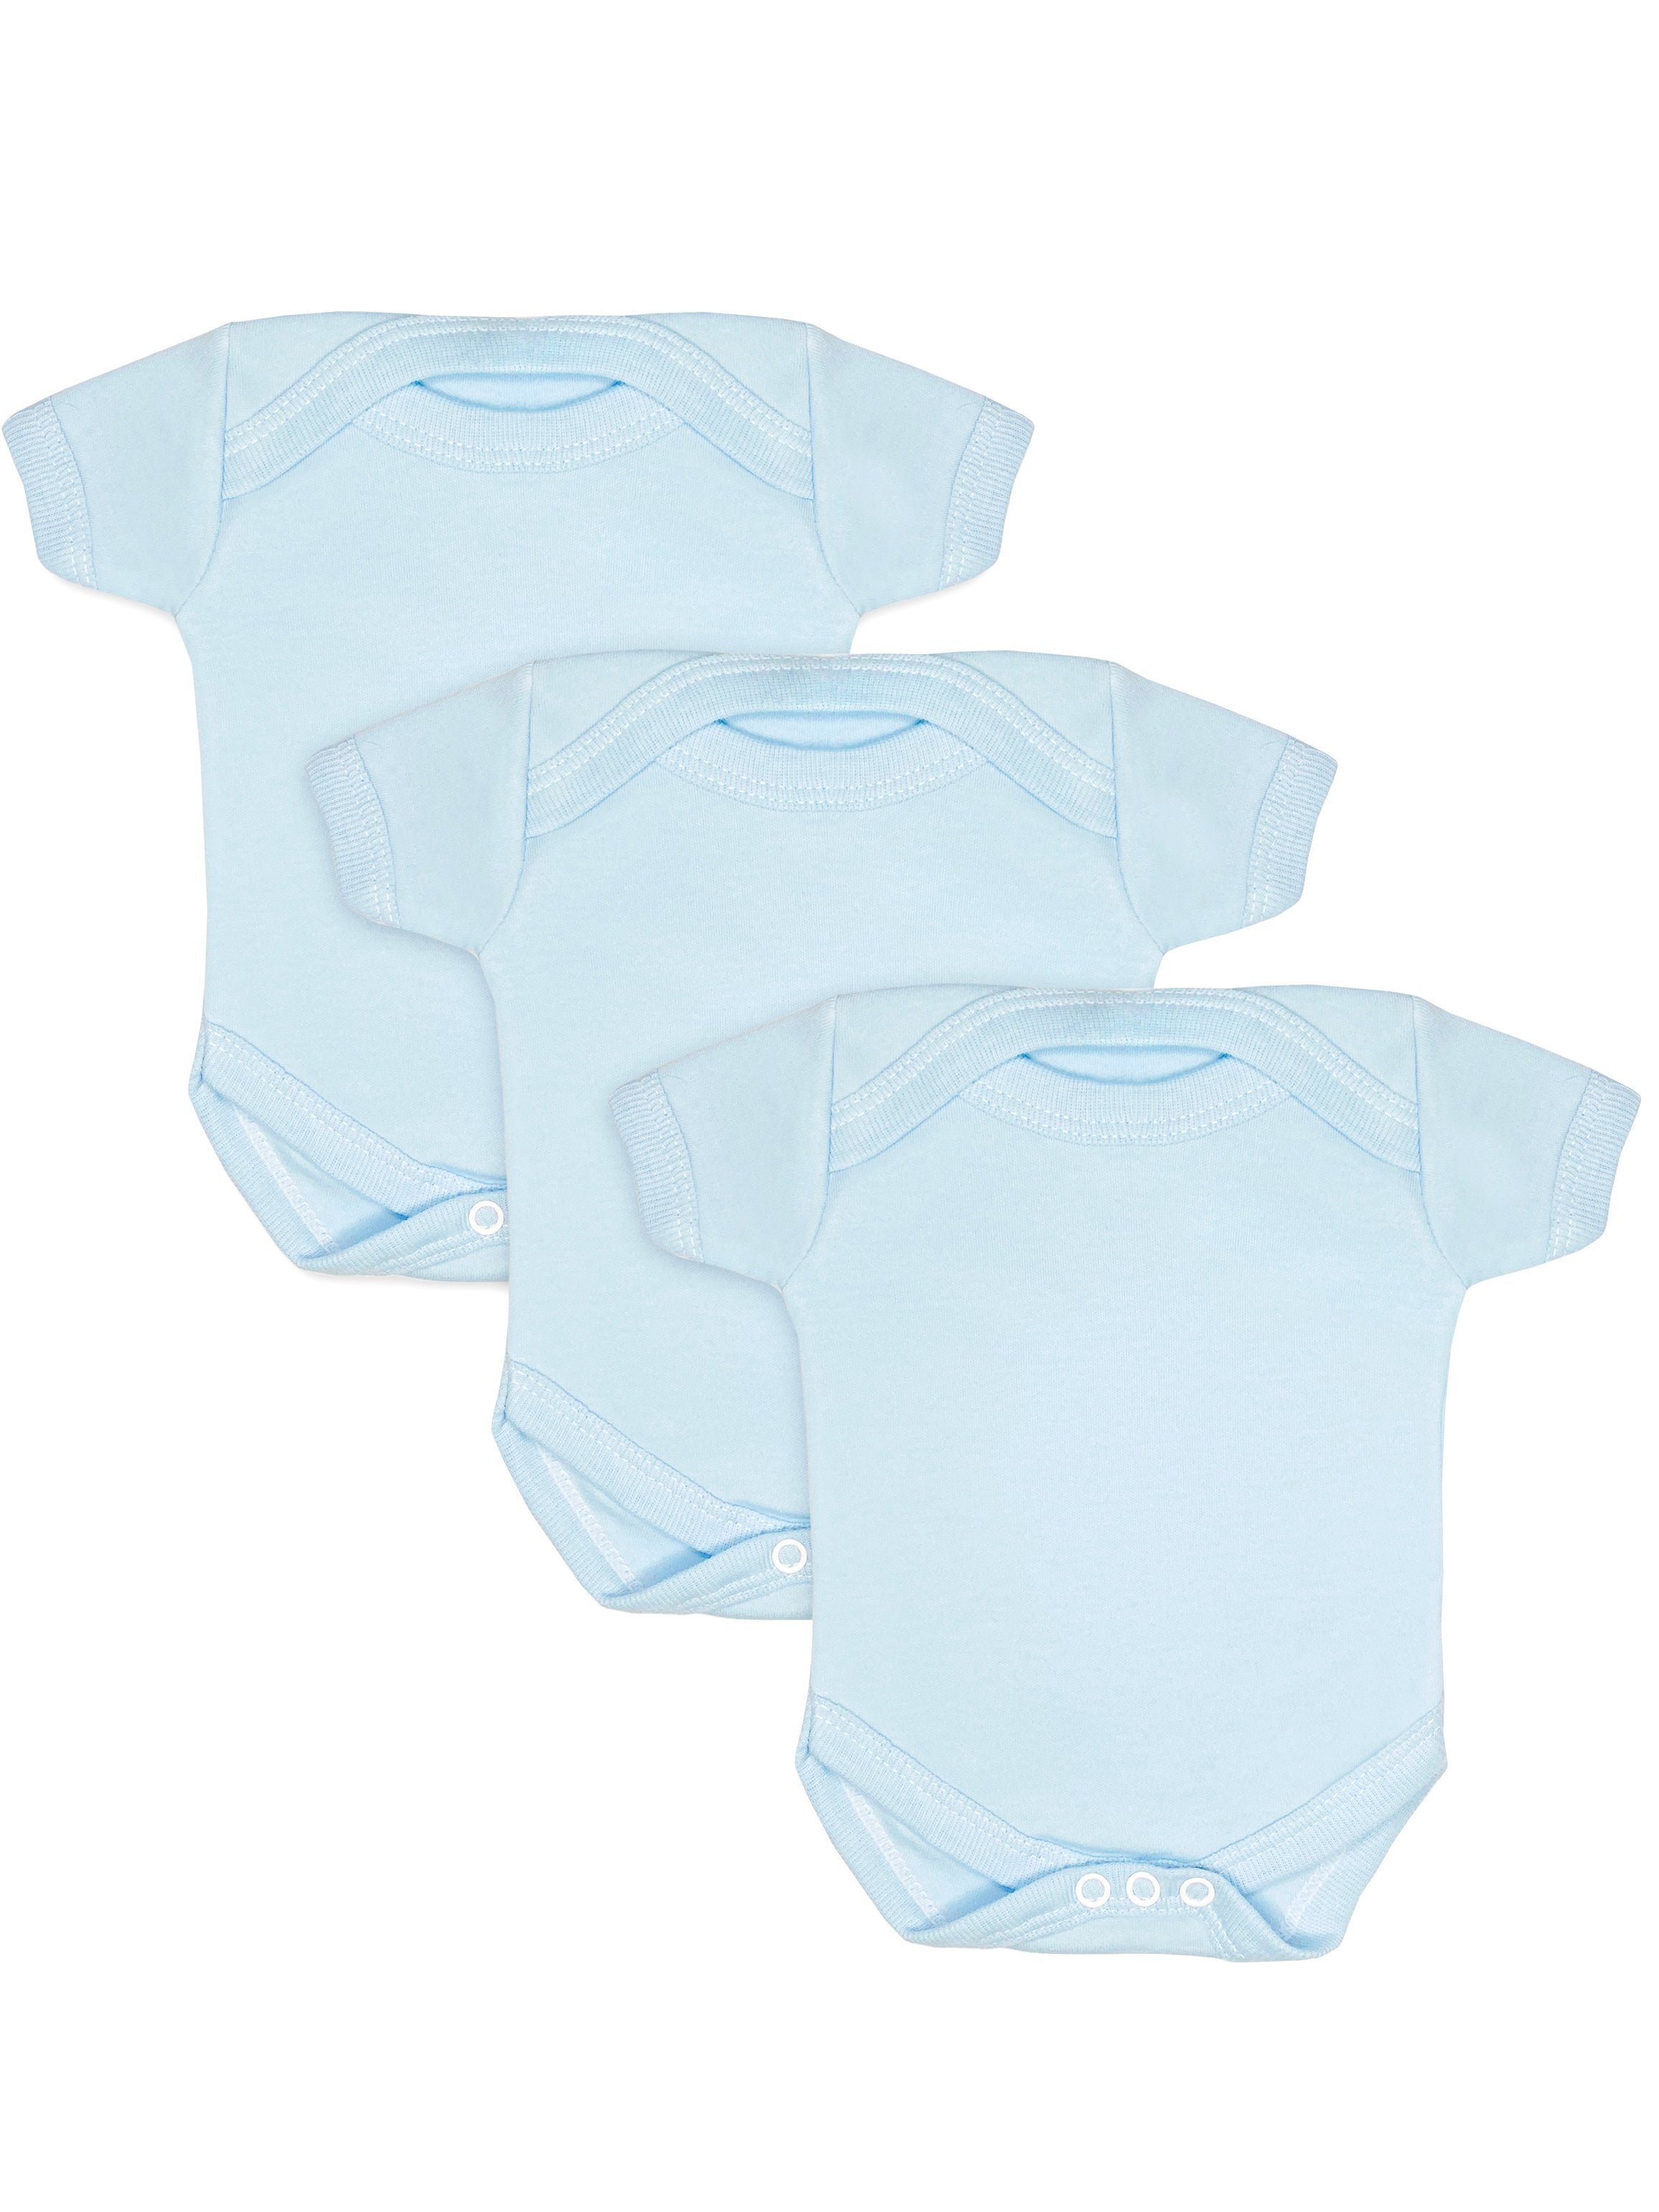 3 Pack - 100% Cotton Blue Short Sleeved Bodysuits Set/Multipack Little Mouse Baby Clothing & Gifts 